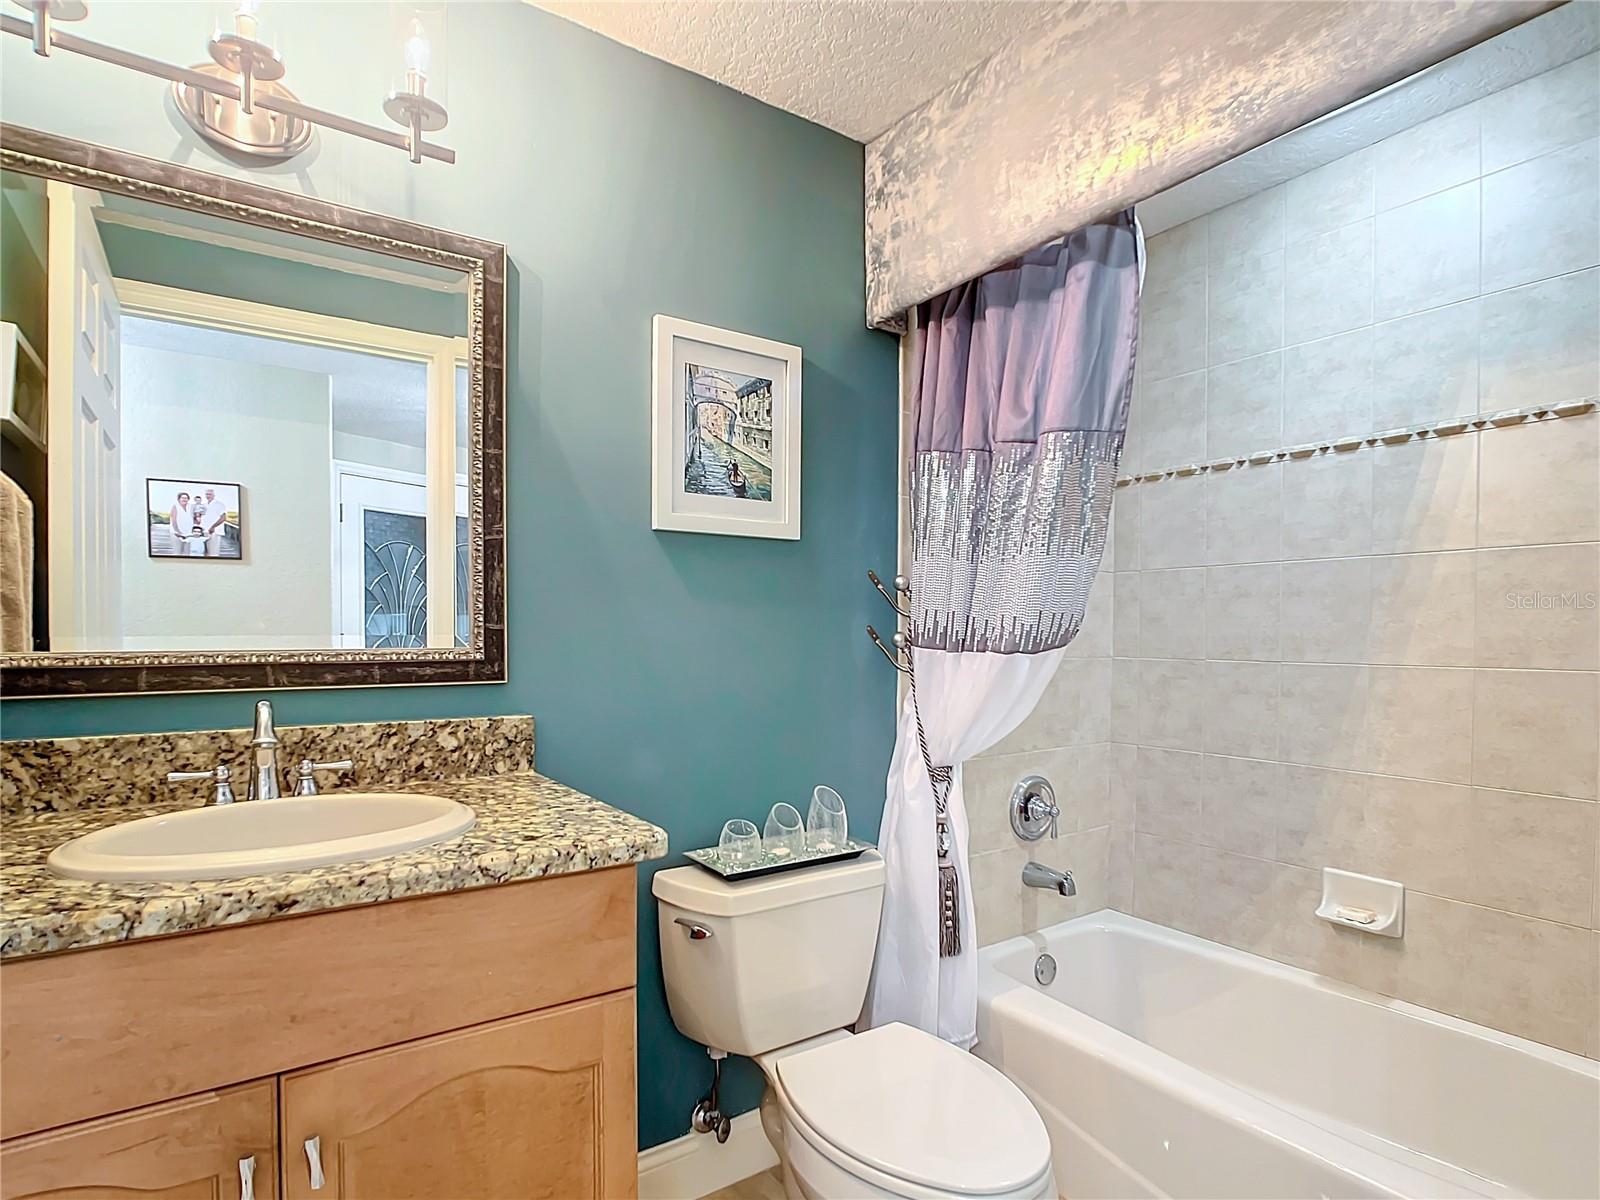 This is the 3rd bathroom that is a guest bathroom for guests and close to the 3rd bedroom.